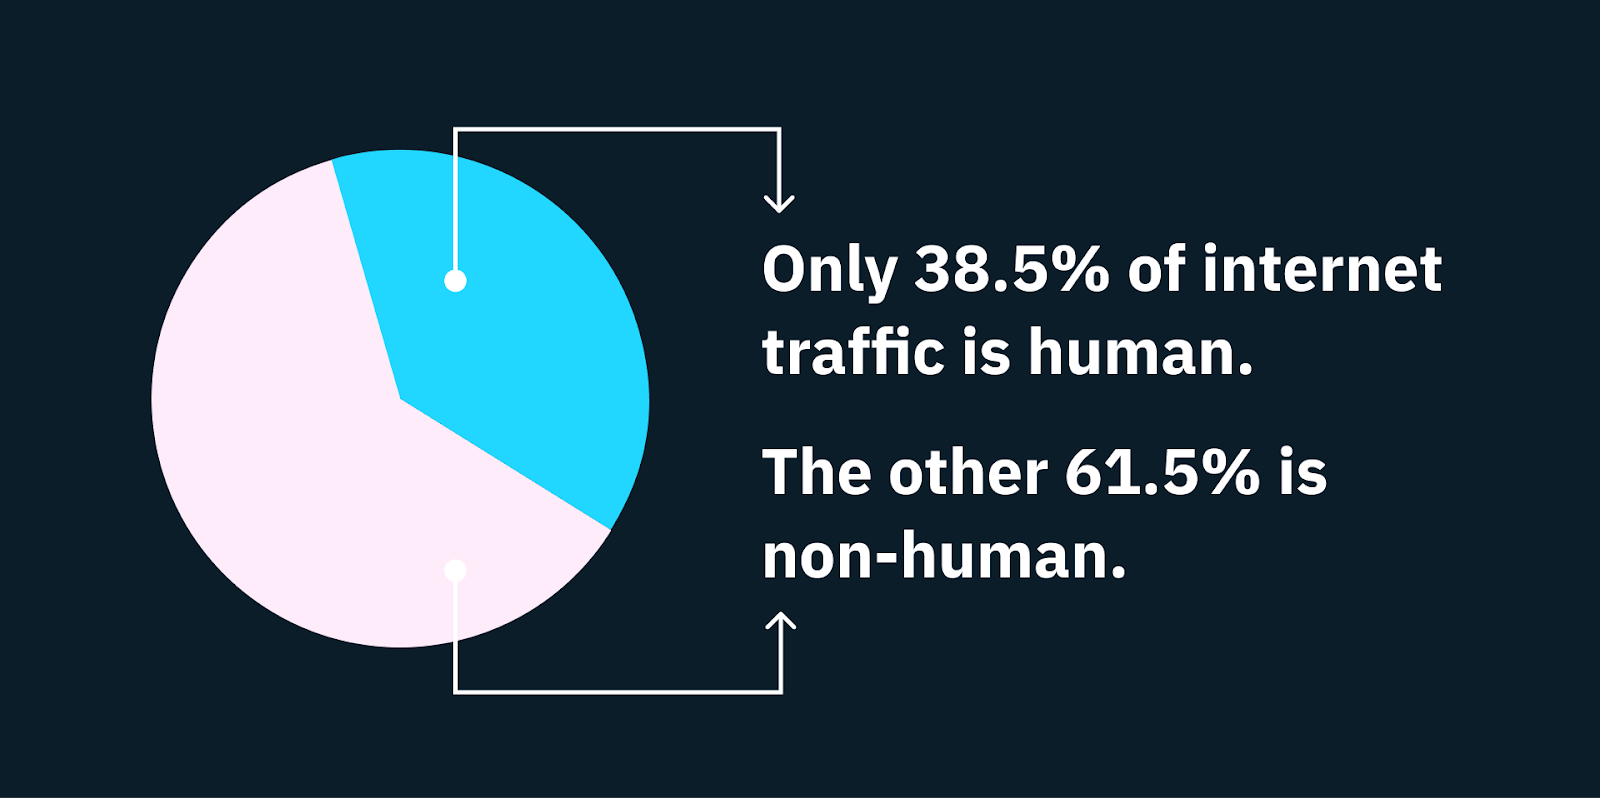 Graph of a pie chart that shows 38.5% of internet traffic is human, while the other 61.5% is bots.